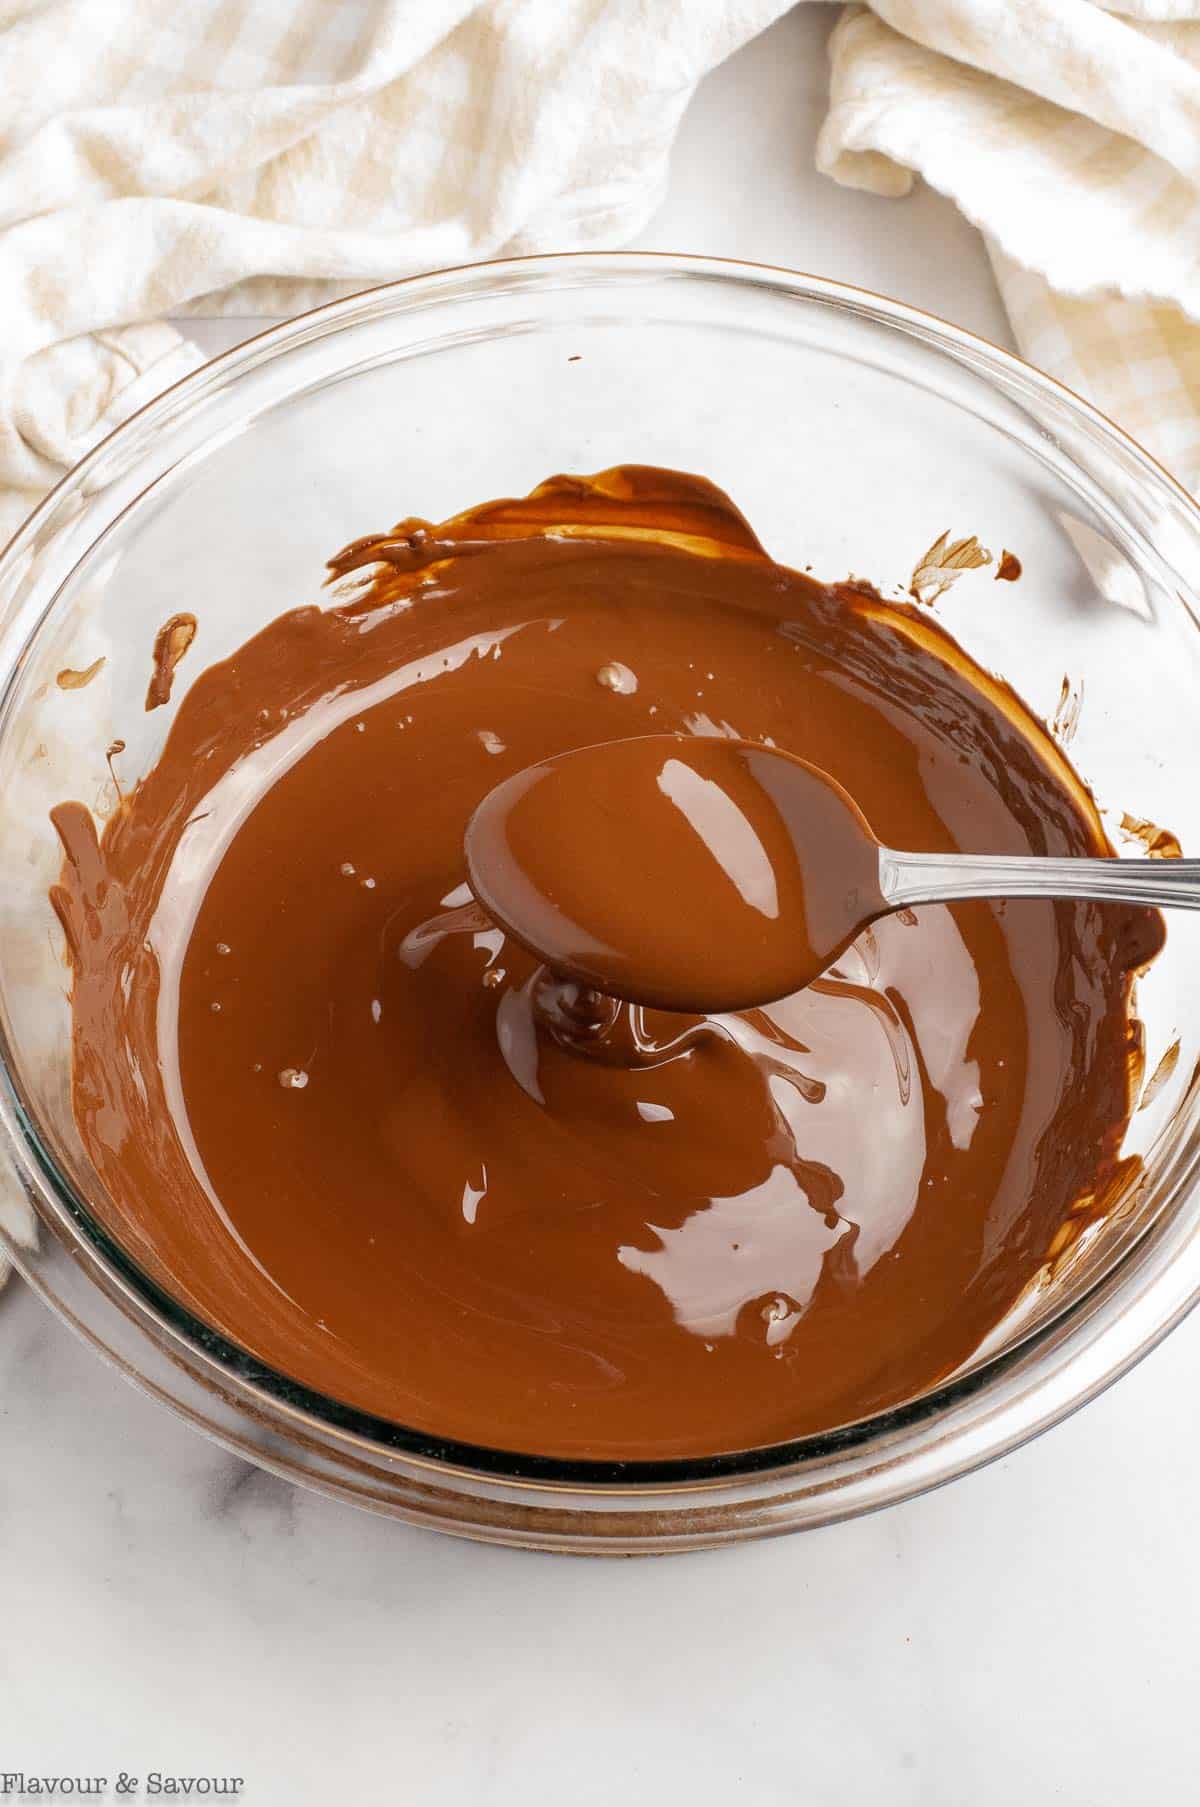 A spoonful of melted chocolate.